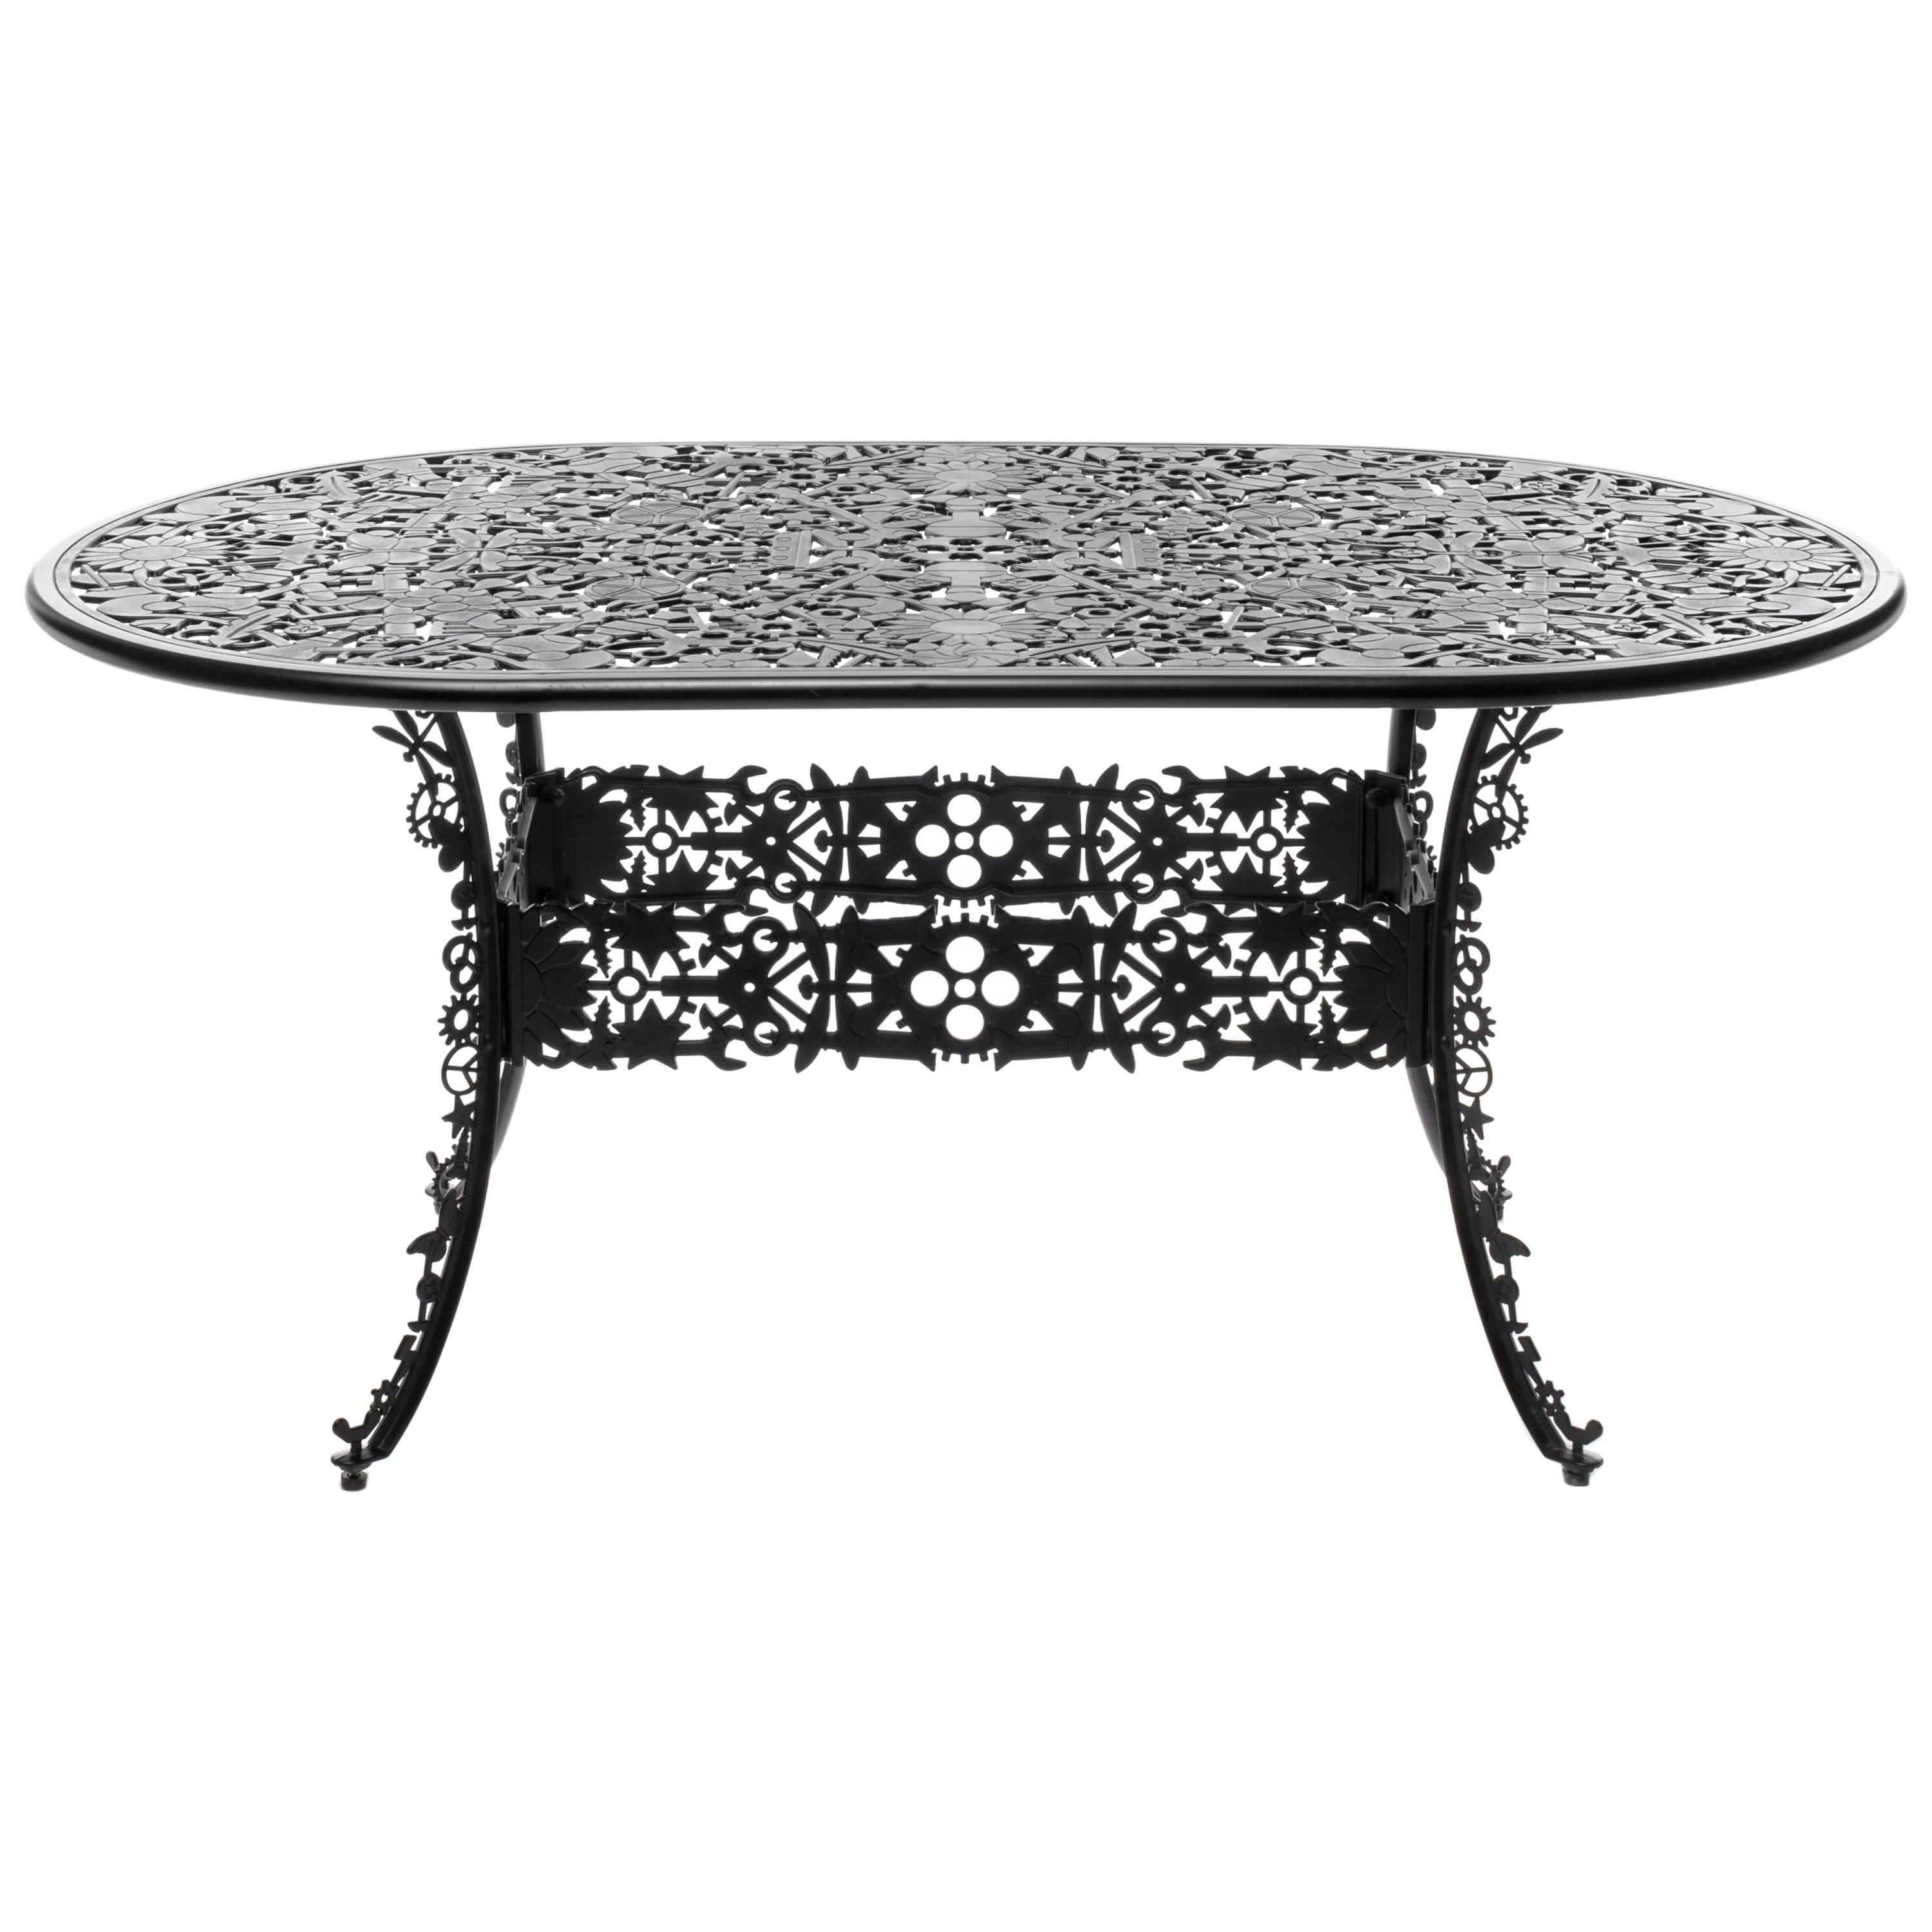 Aluminum Oval Table "Industry Collection" by Seletti, Black